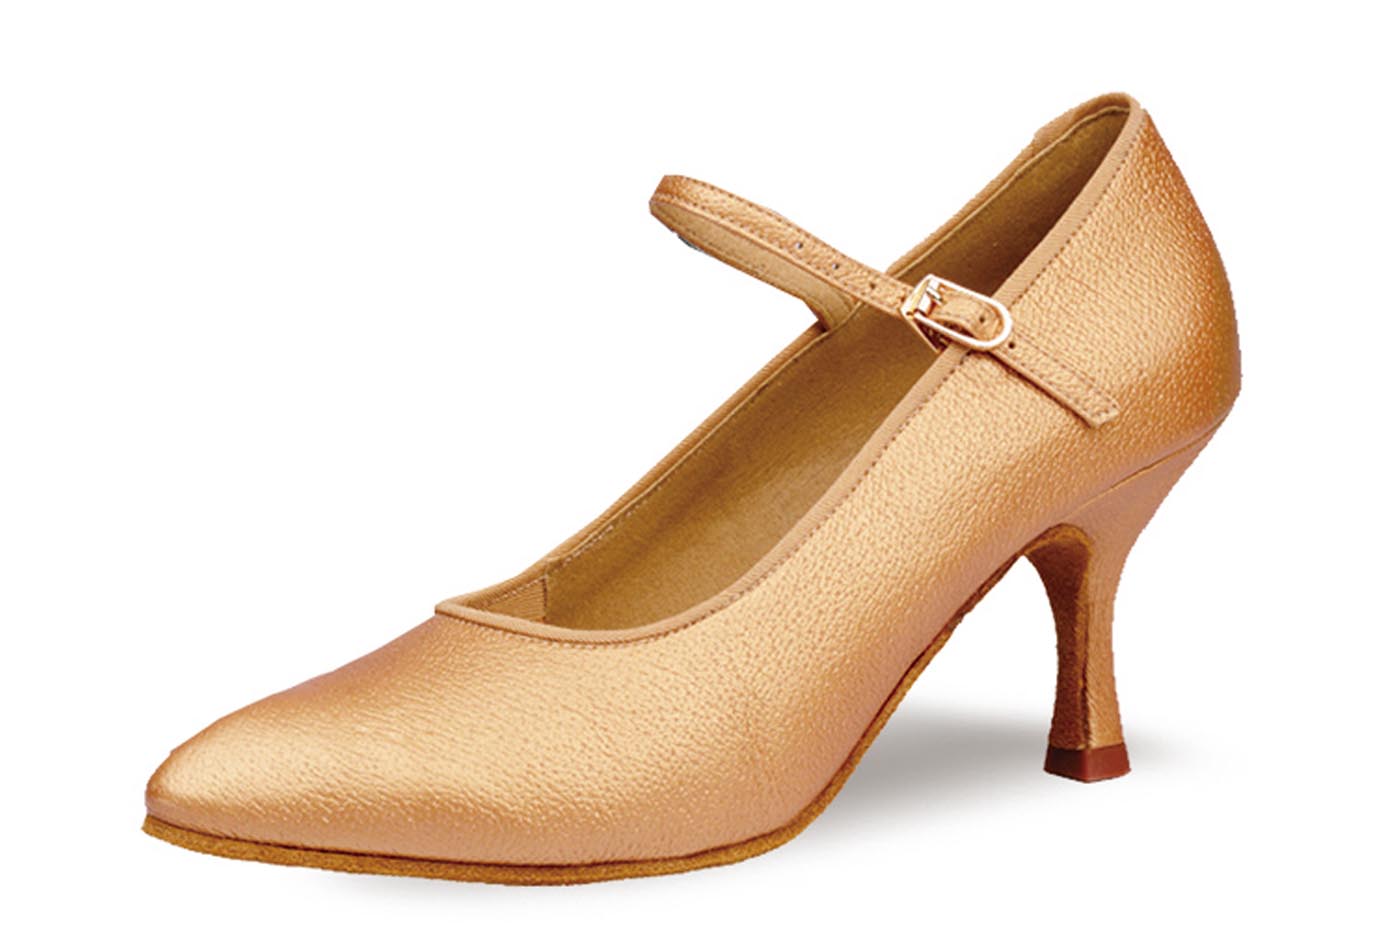 BD Dance 101 Ladies Tan Leather Ballroom Dance Shoe with Strap and Buckle Closure